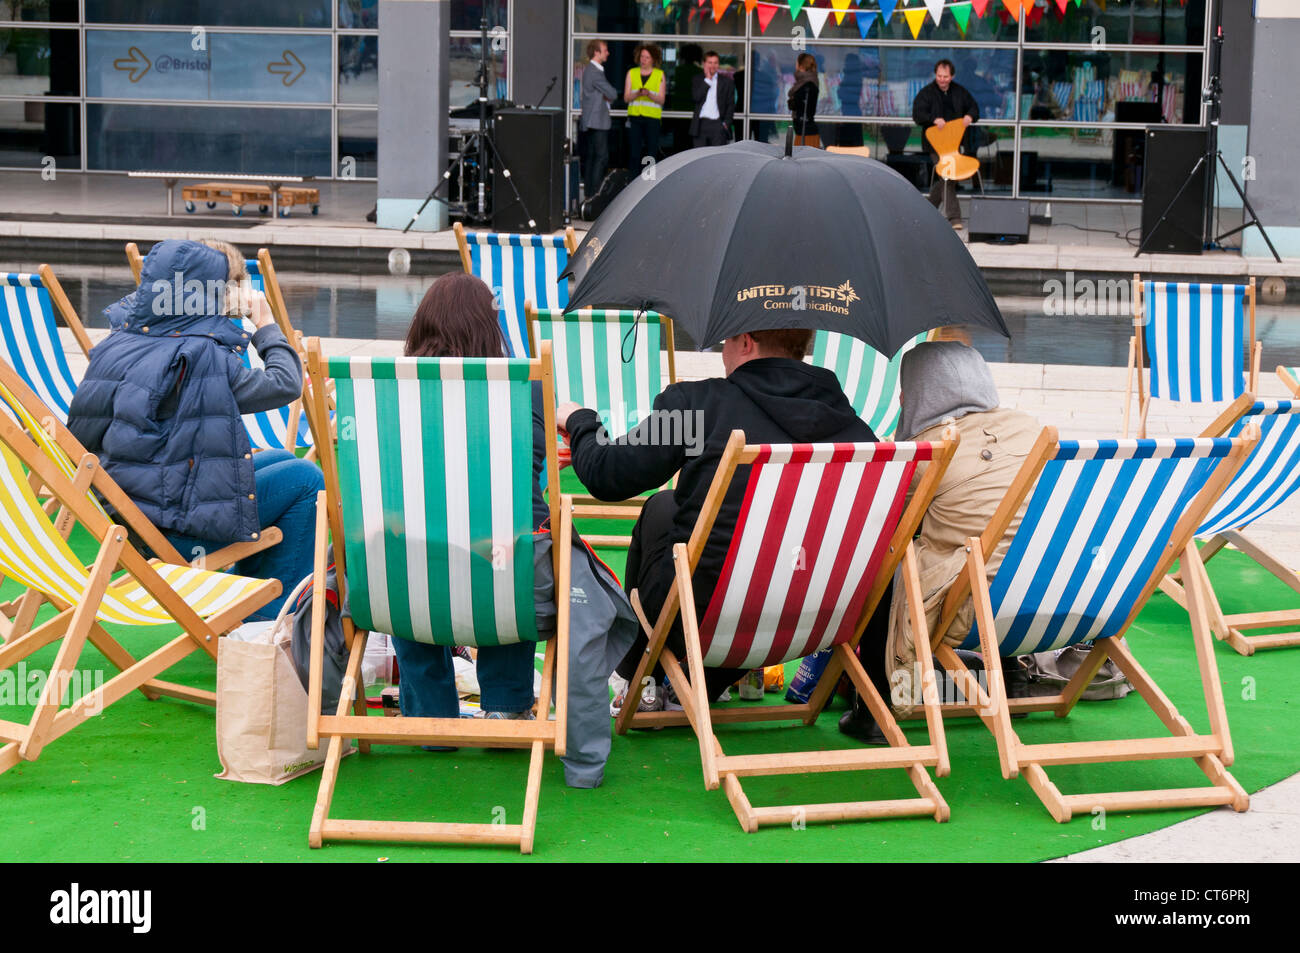 People enjoying themselves despite bad weather in Millennium Square in the City Centre of Bristol, UK Stock Photo